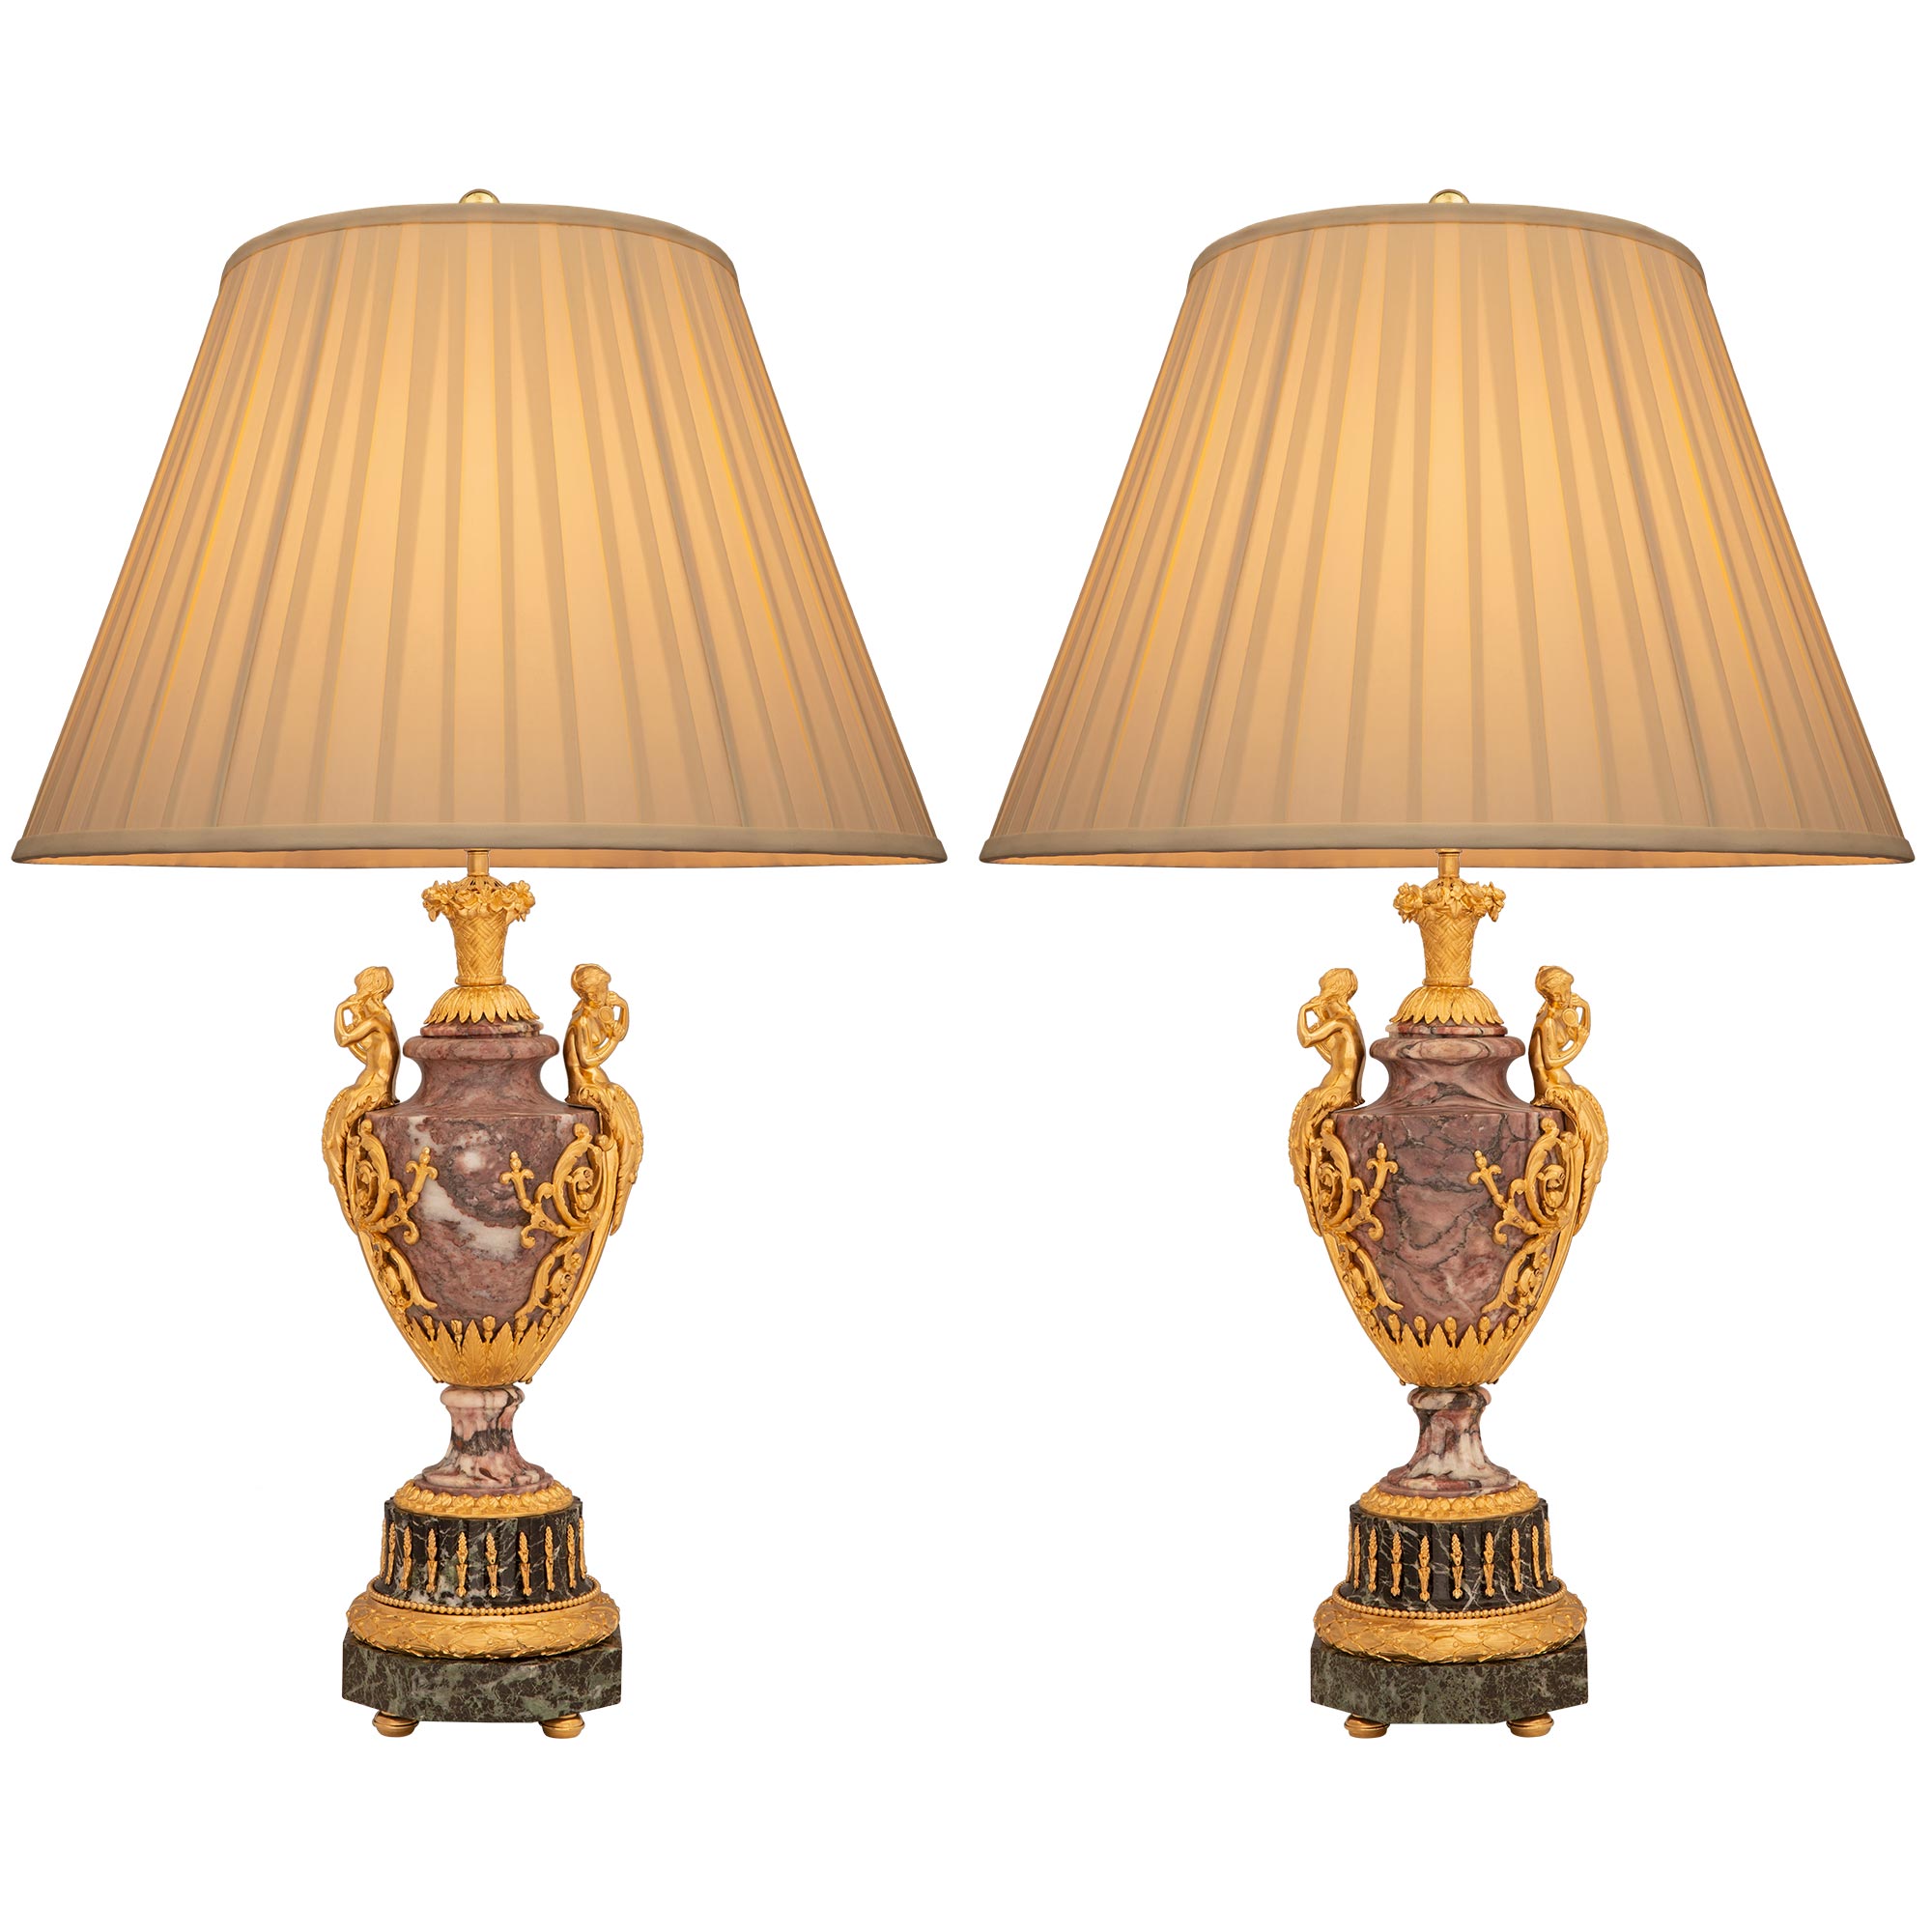 A pair of French 19th century Louis XVI st. ormolu, Vert de Patricia and Rose Vif marble urns mounted in to lamps